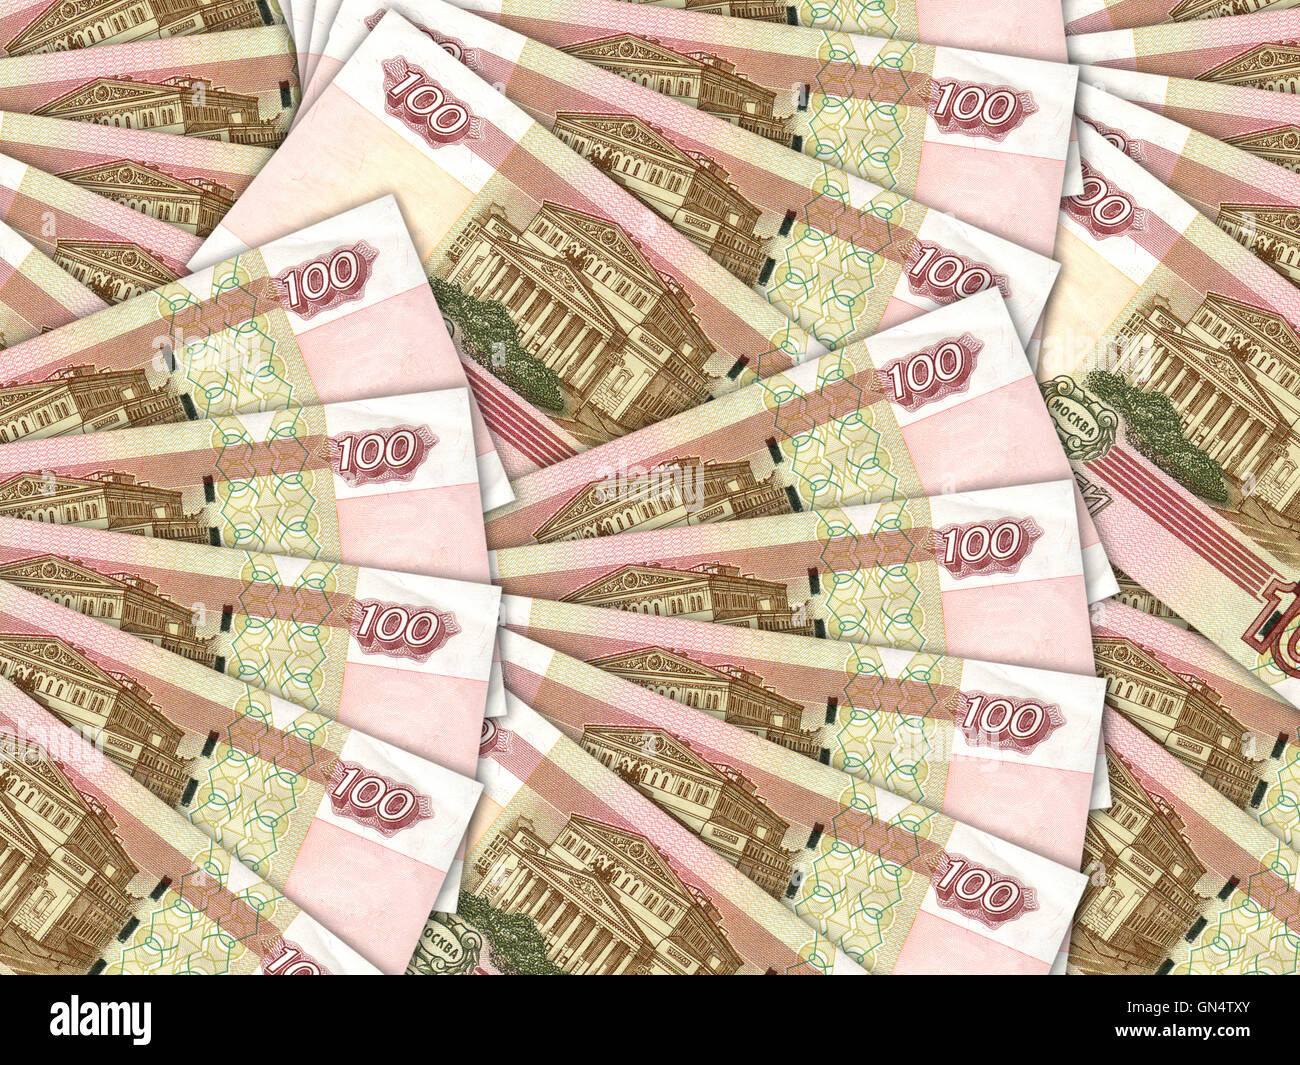 Background of money pile 100 russian rouble bills Stock Photo